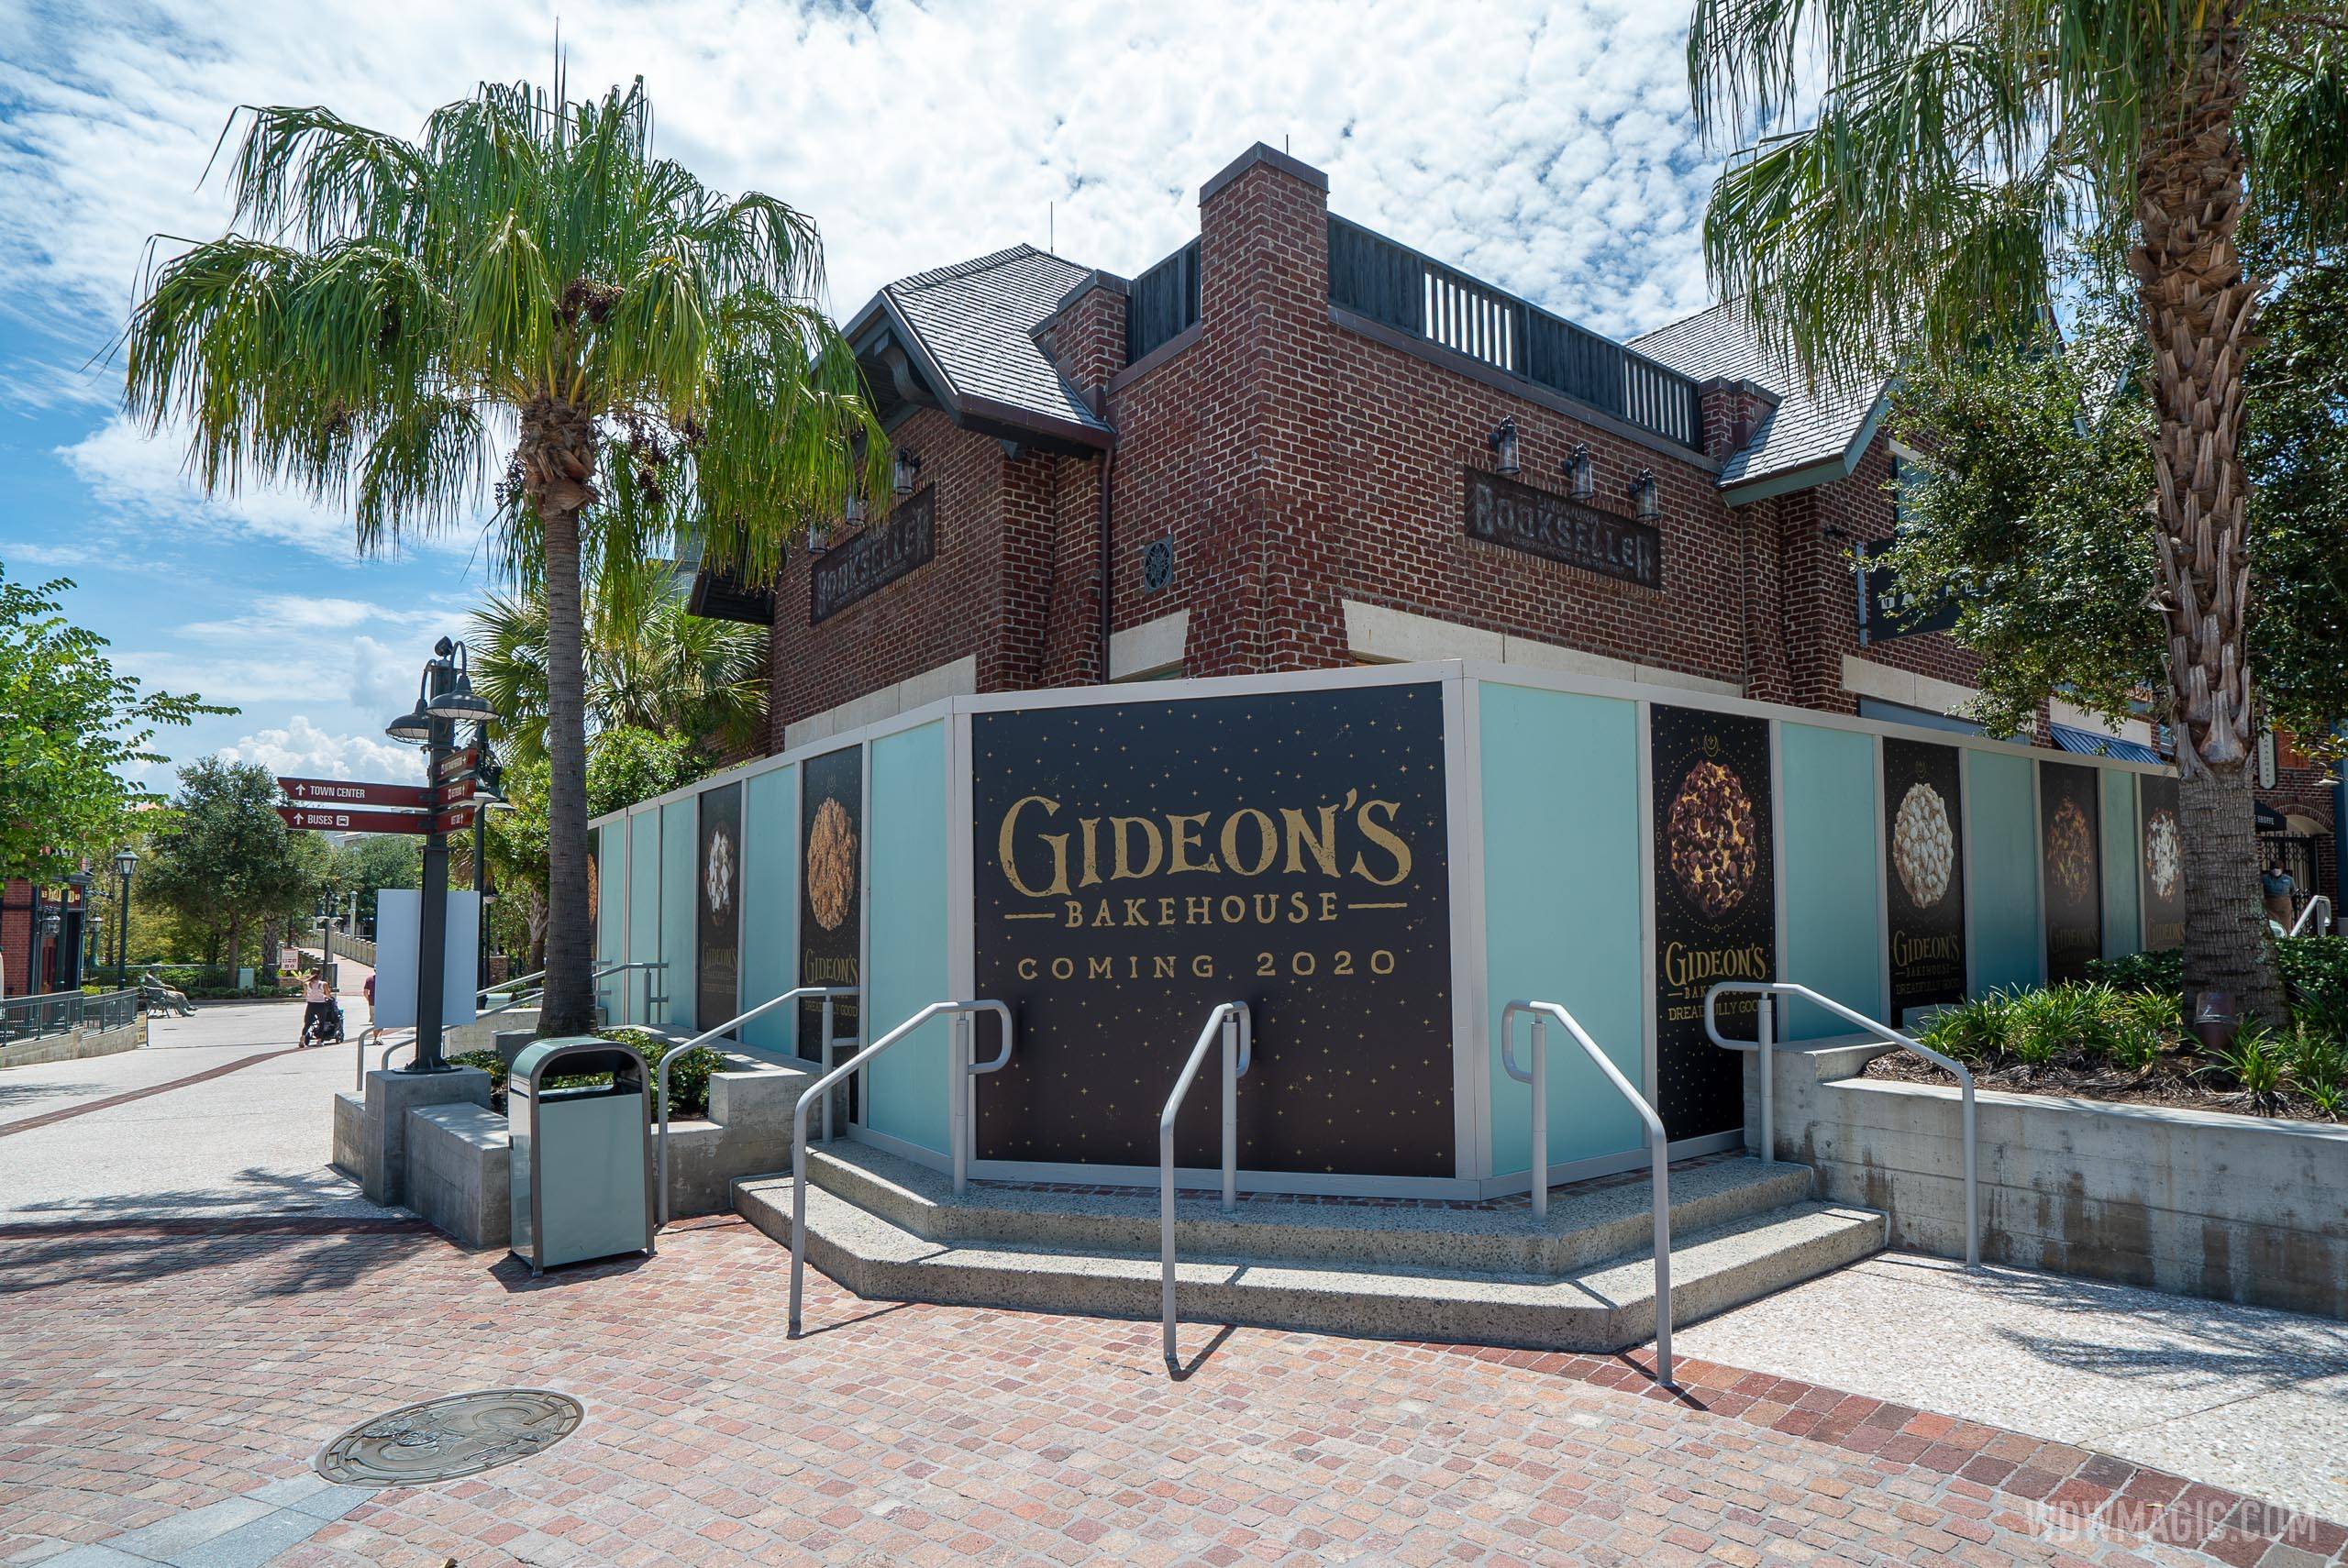 PHOTOS - Gideon's Bakehouse to be set inside Lindwurm Bookseller Curious Books and Antiquities